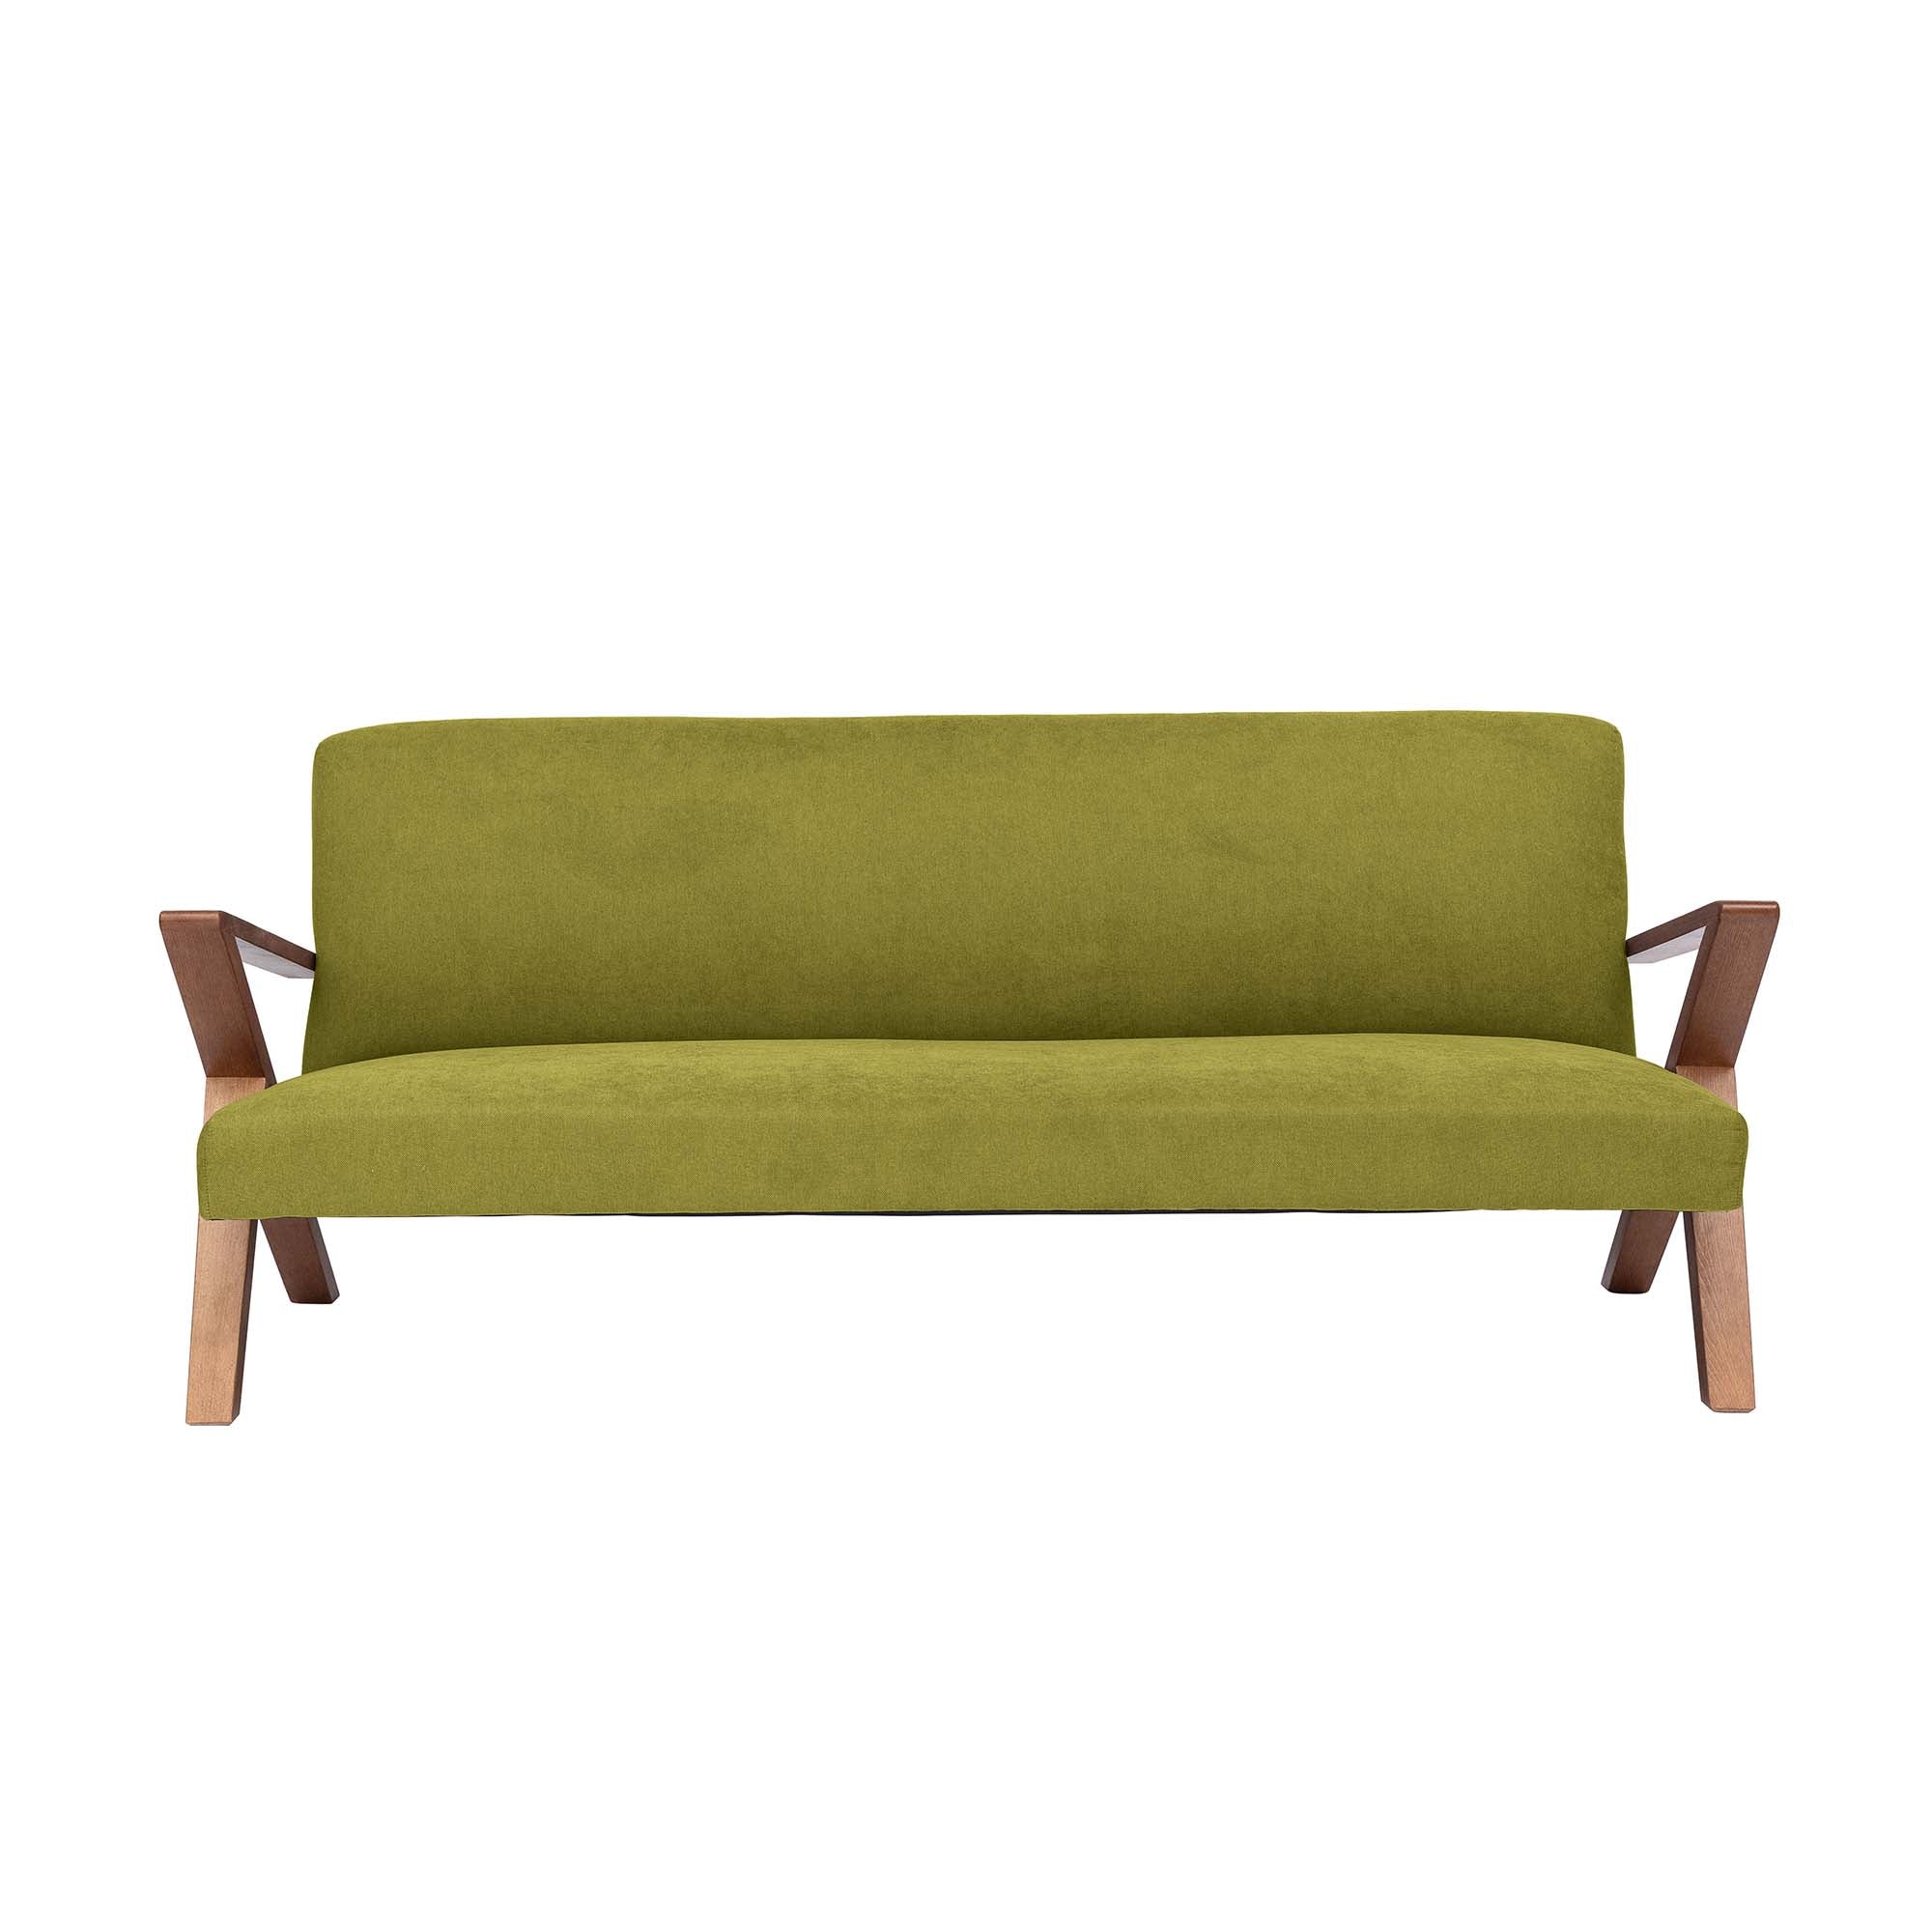  4-seater Sofa Beech Wood Frame, Walnut Colour green fabric, front view